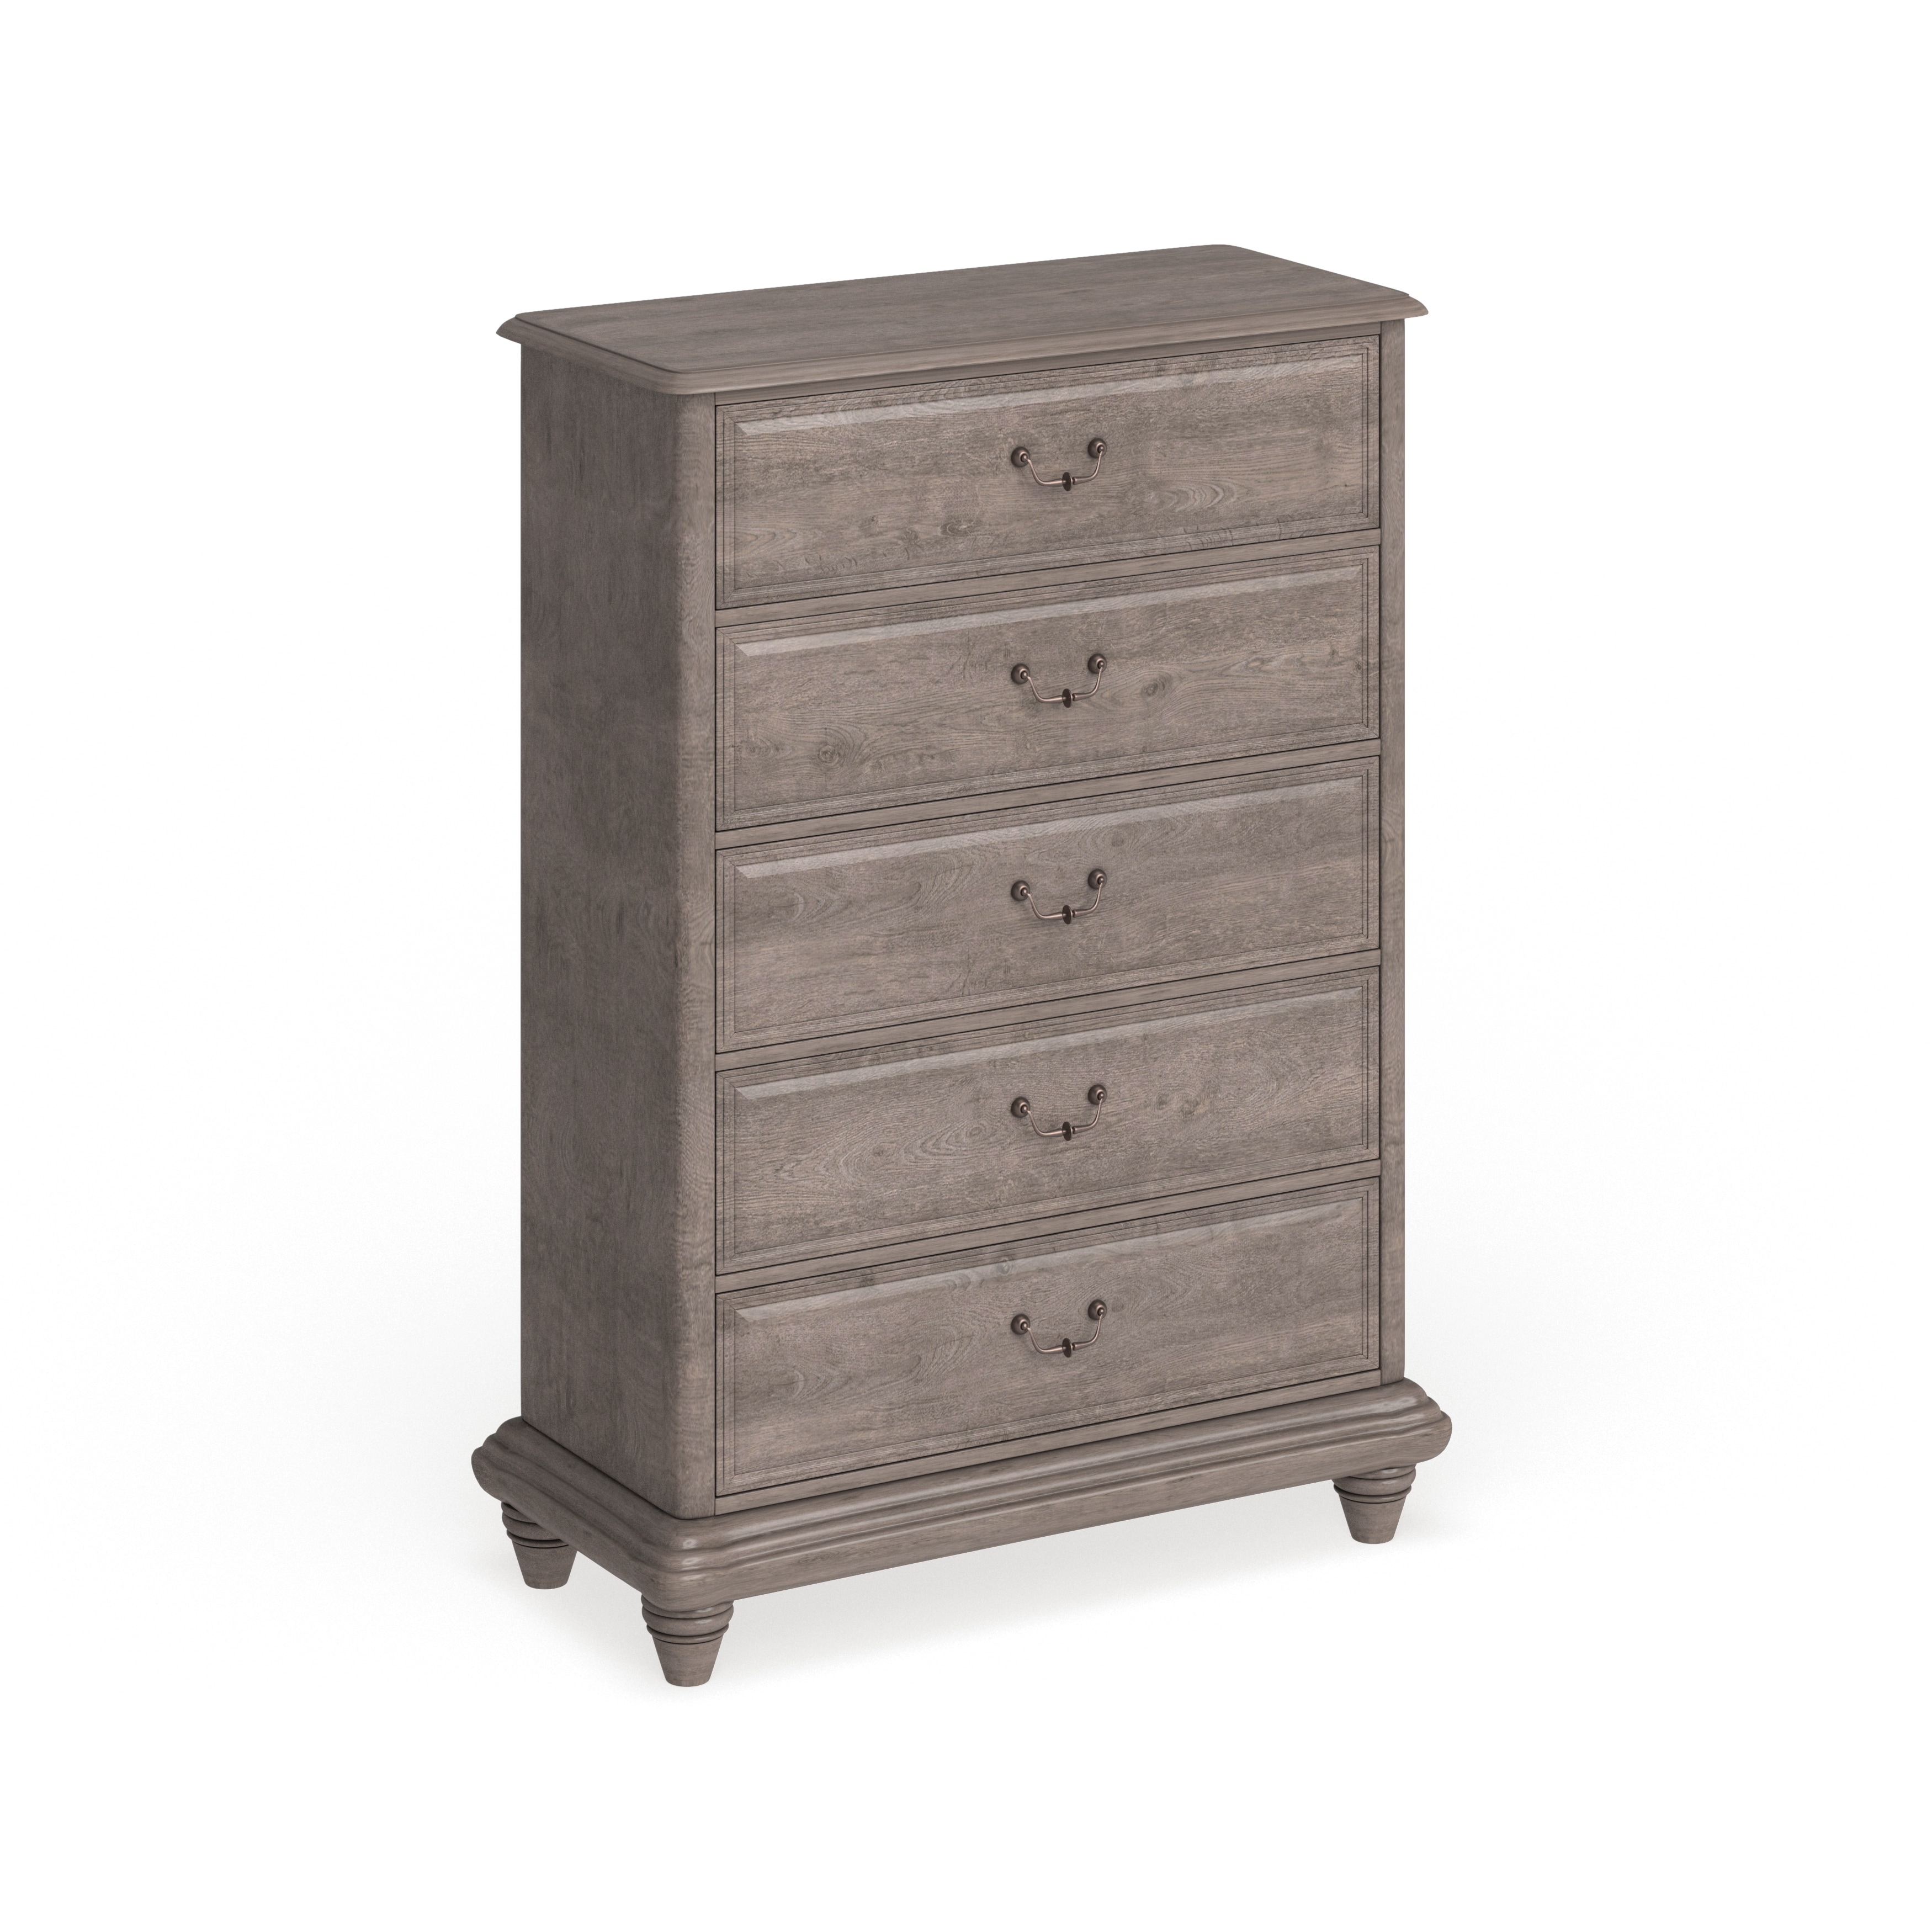 Buy The Gray Barn Dressers Chests Online At Overstock Our Best Bedroom Furniture Deals